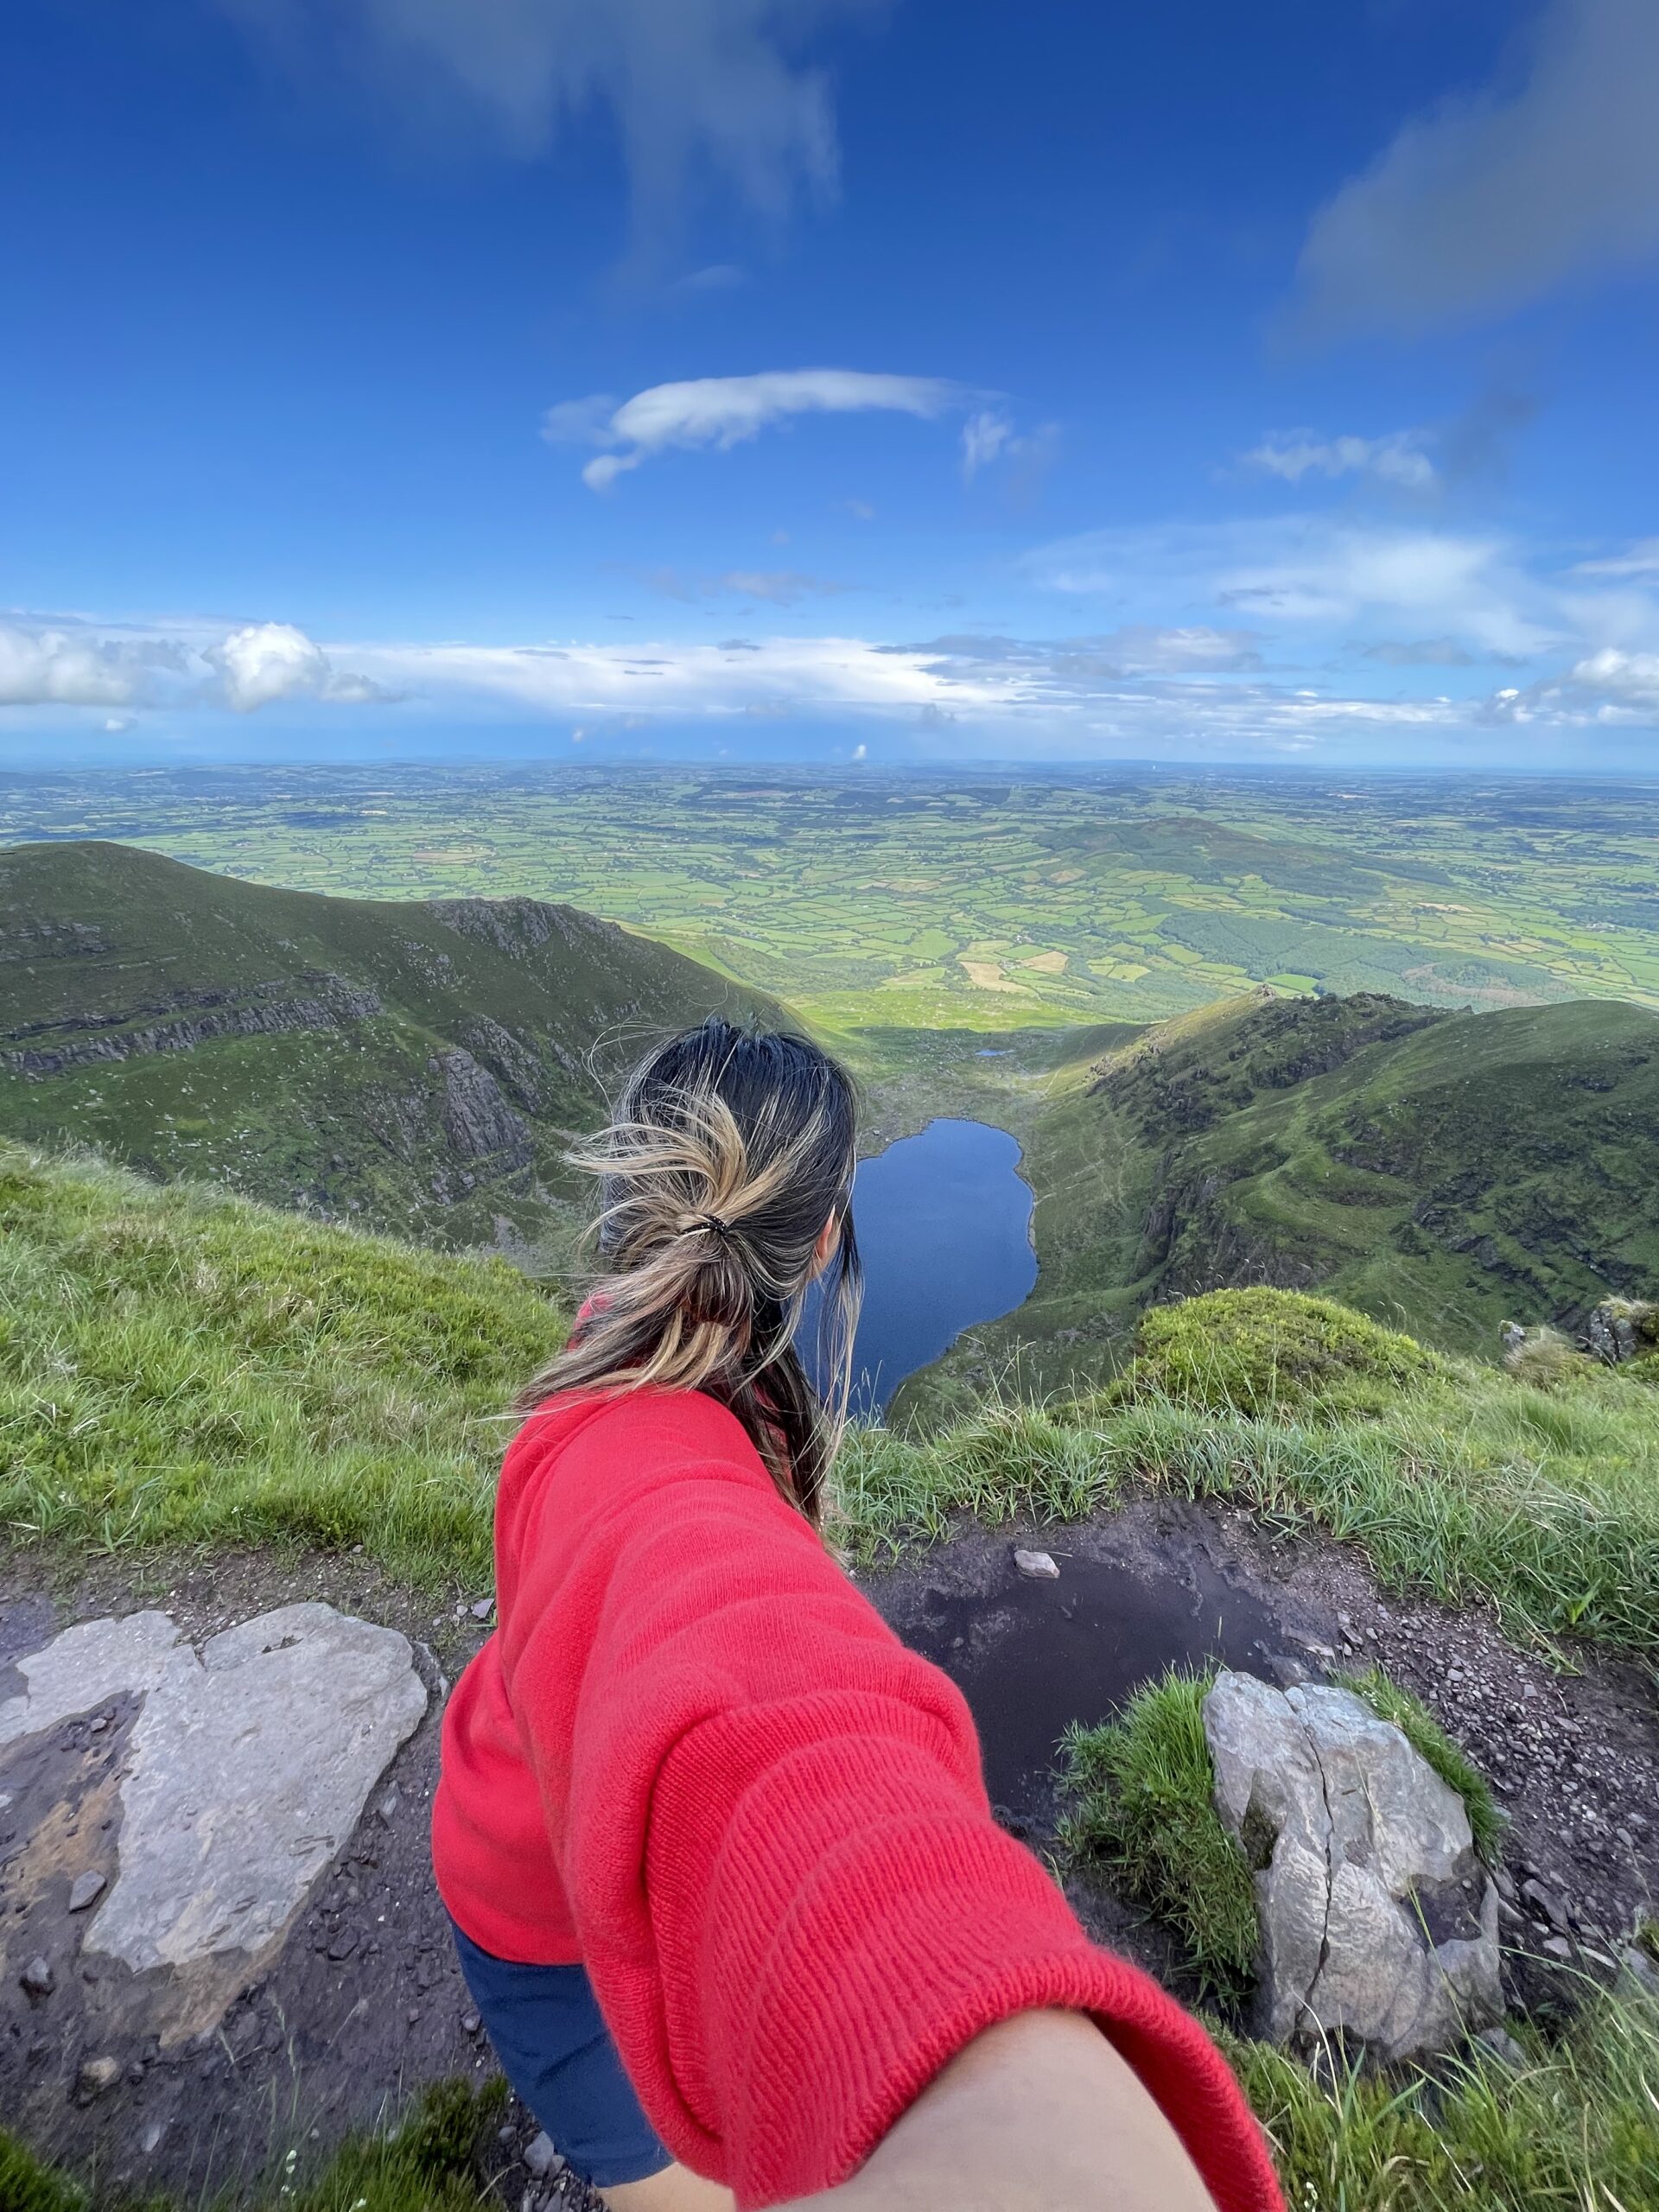 Feeling on Top of the World in Ireland